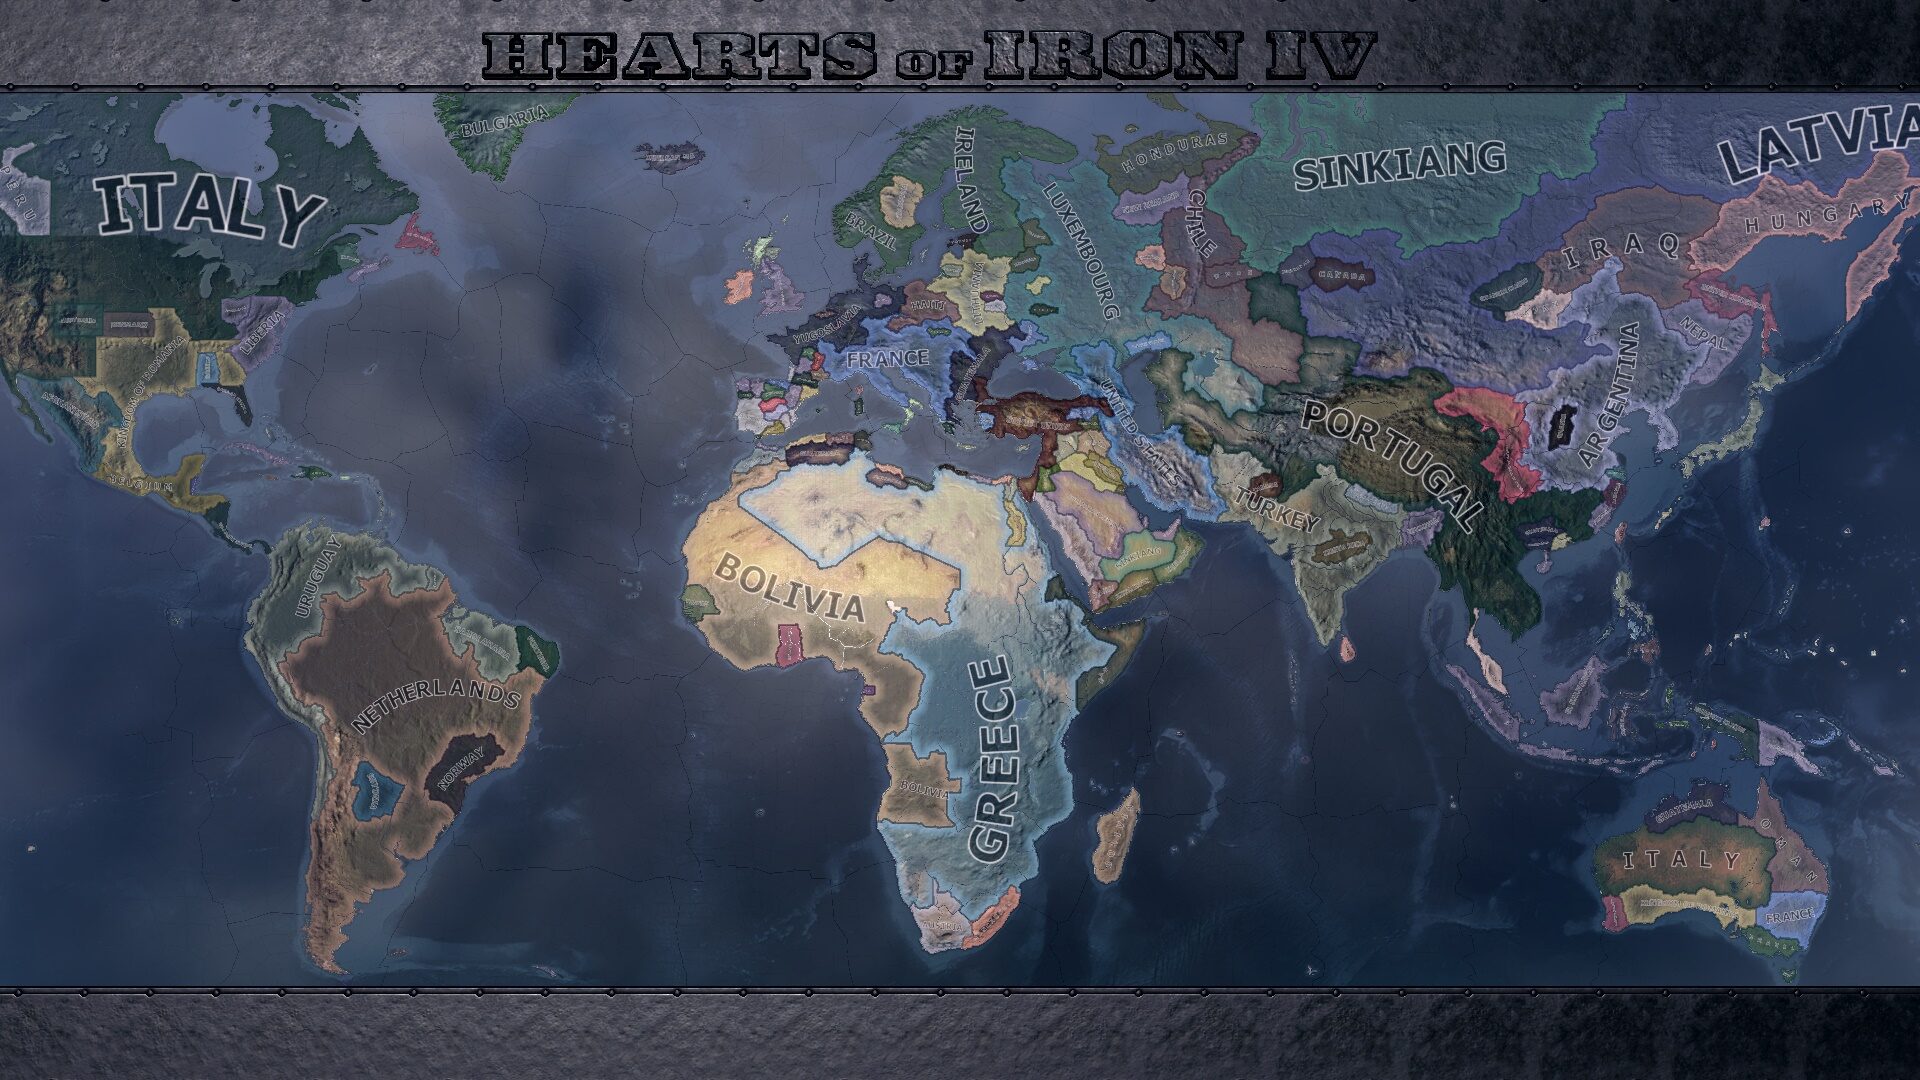 hearts of iron 4 versions